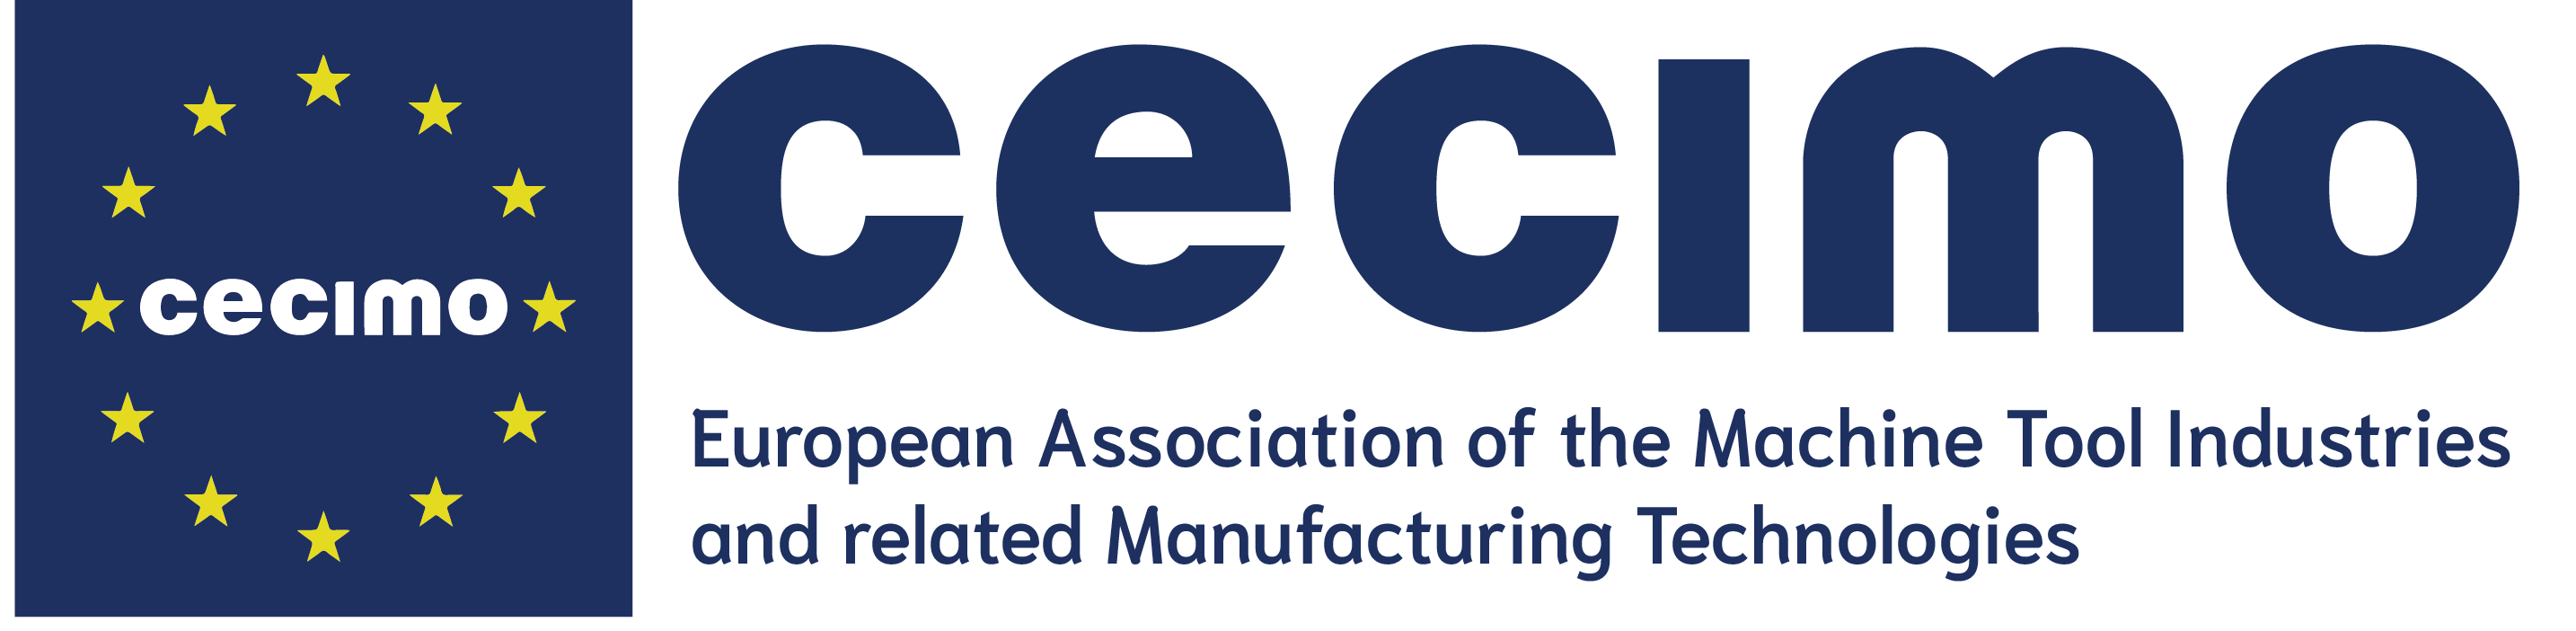 European Association of the Machine Tool Industries and related Manufacturing Technologies